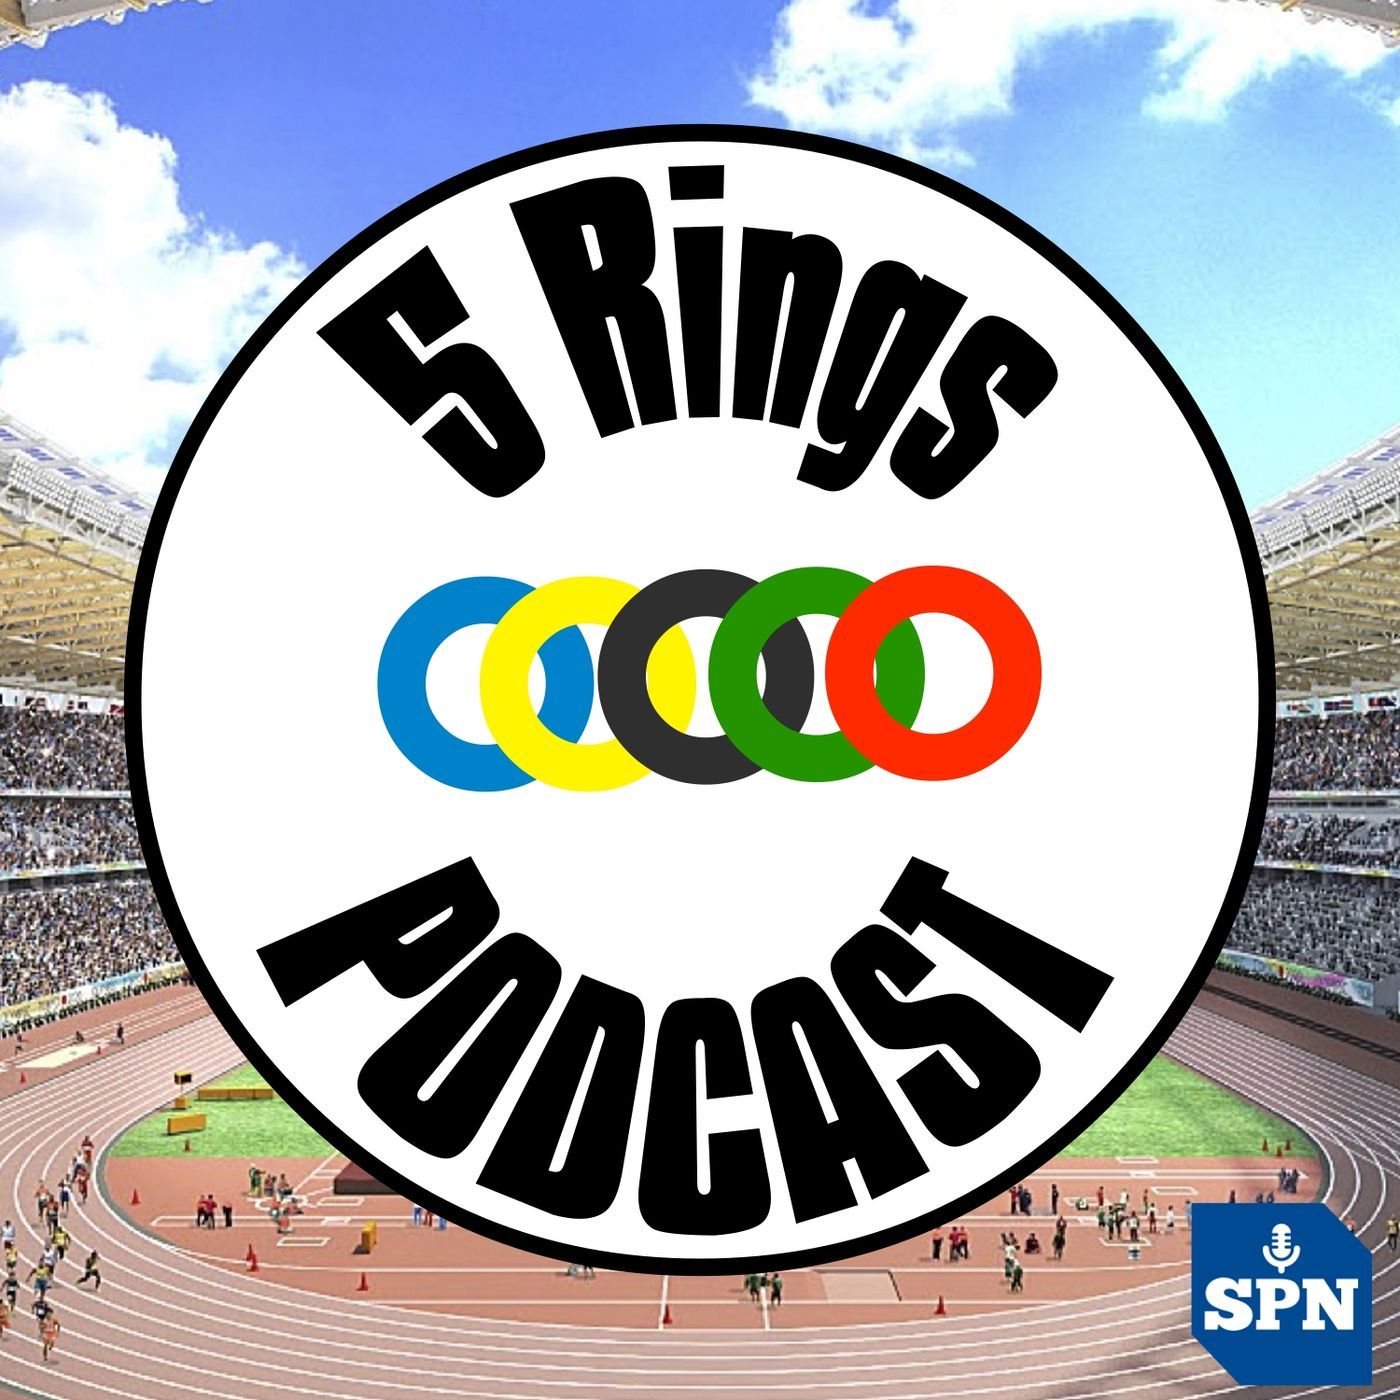 5 Rings Podcast - Daily Coverage of Tokyo 2020 with Kevin Laramee and Duane Rollins - Day 10 Review